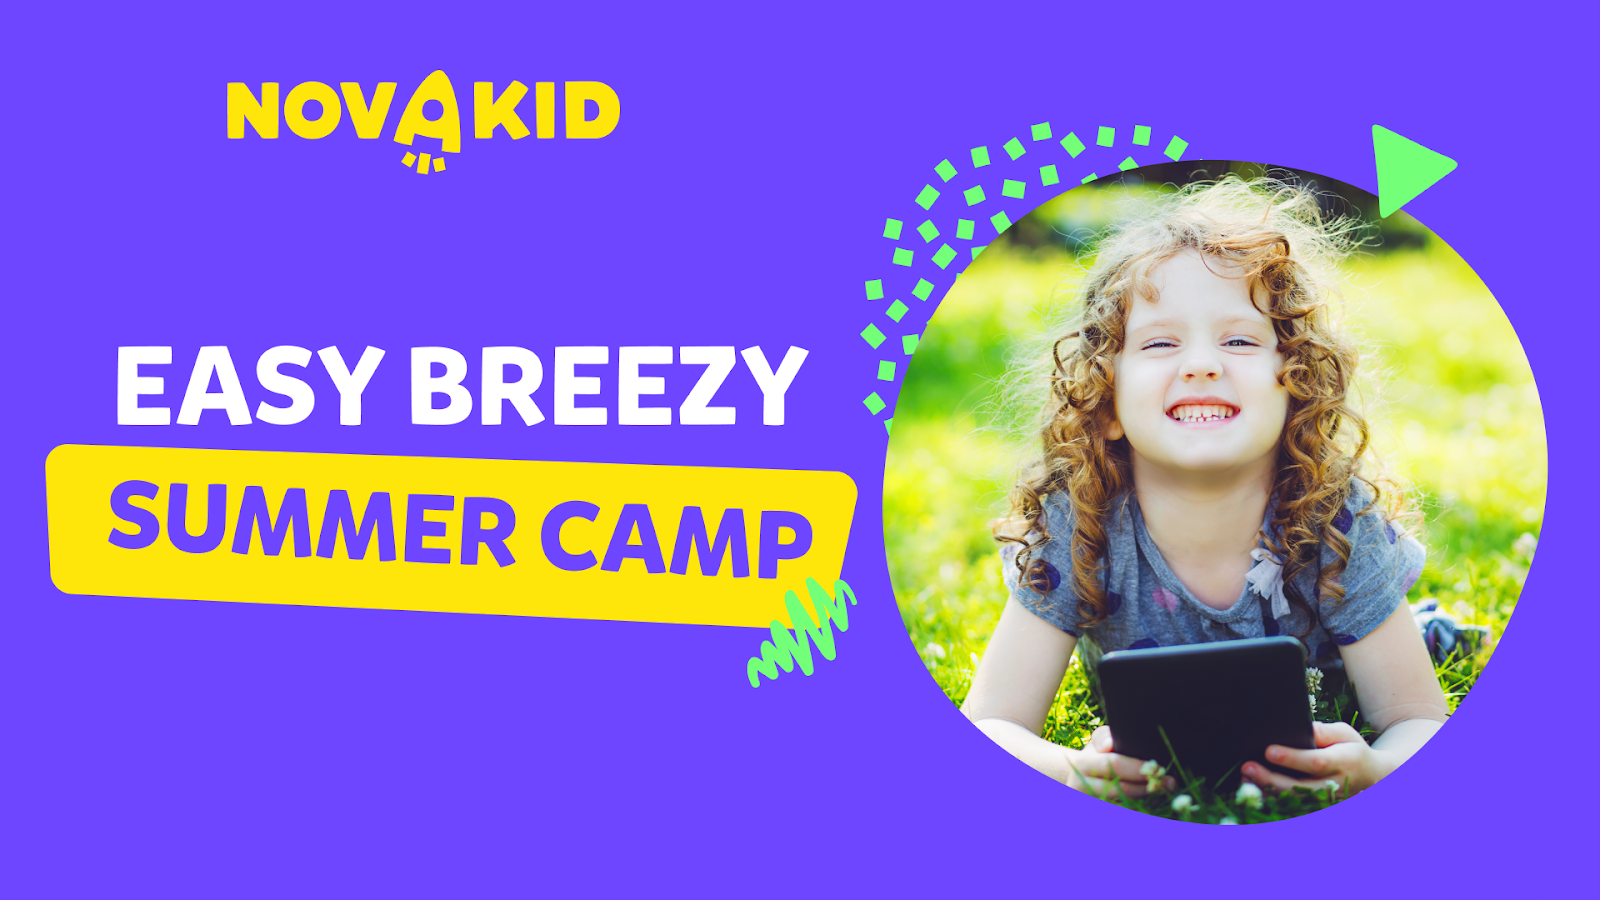 Take It Easy with Easy Breezy: Novakid re-launches its virtual summer camp for children